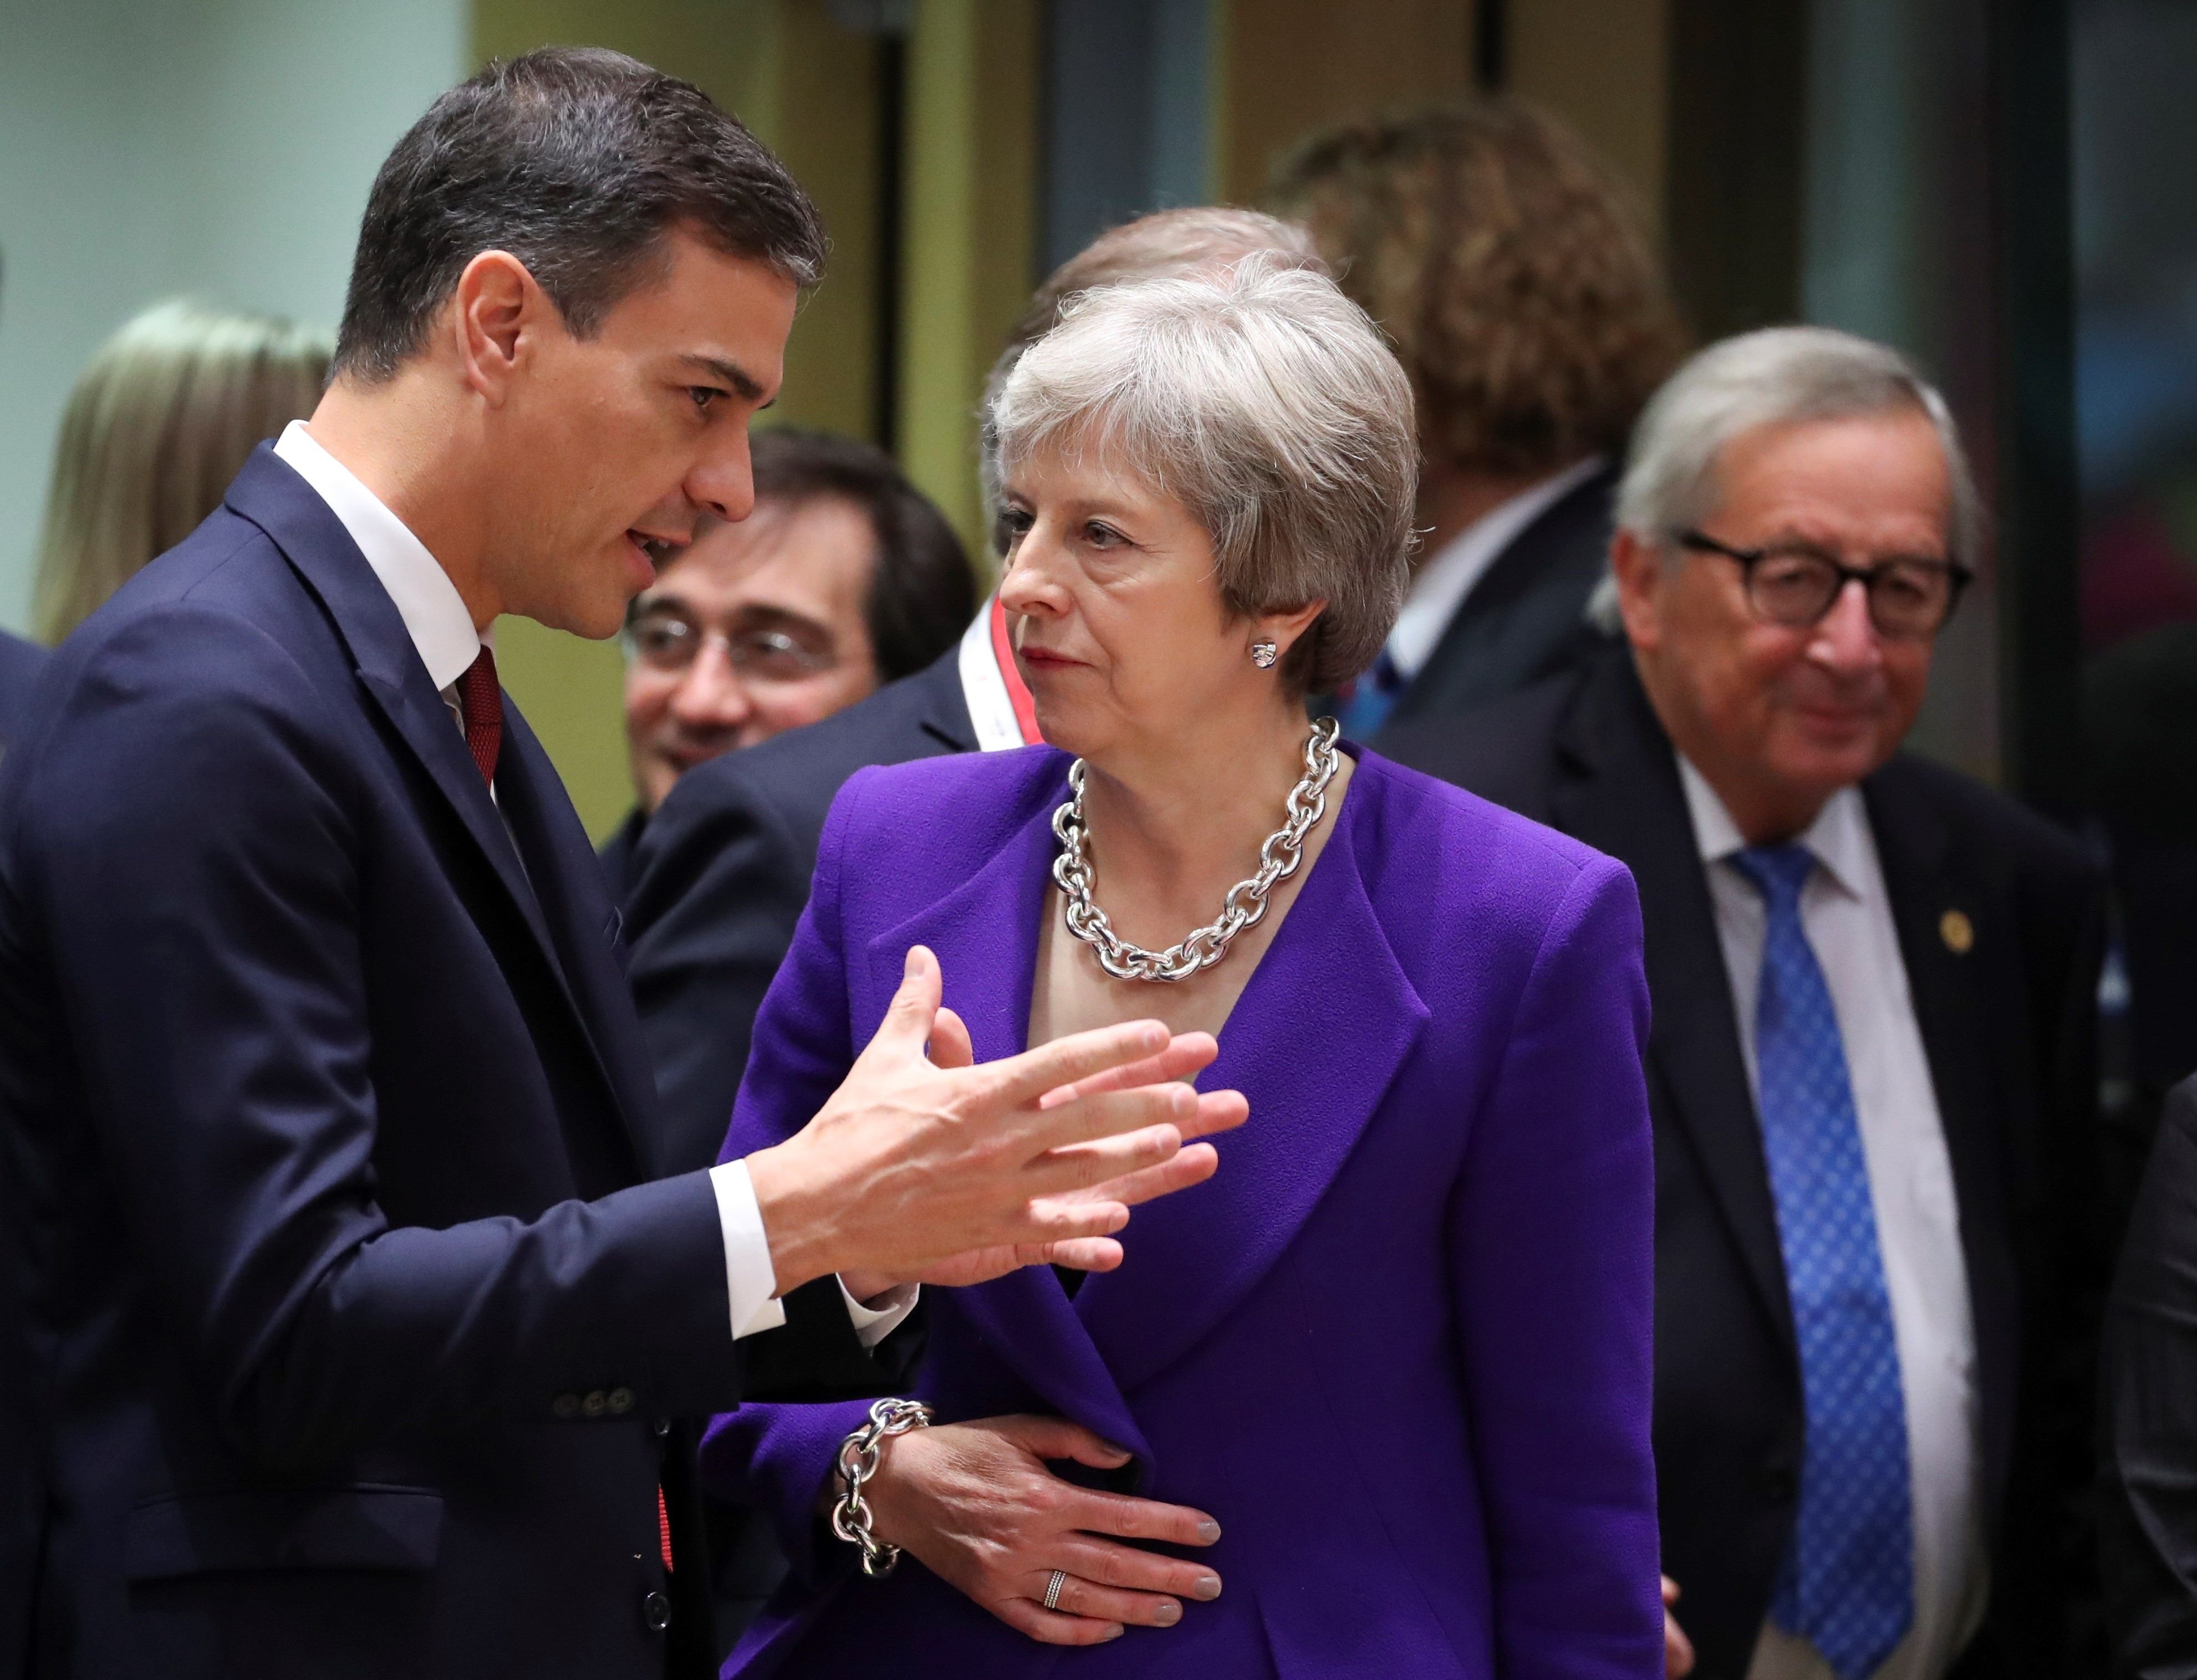 Spanish government "doesn't count out" no-deal Brexit, preparations underway